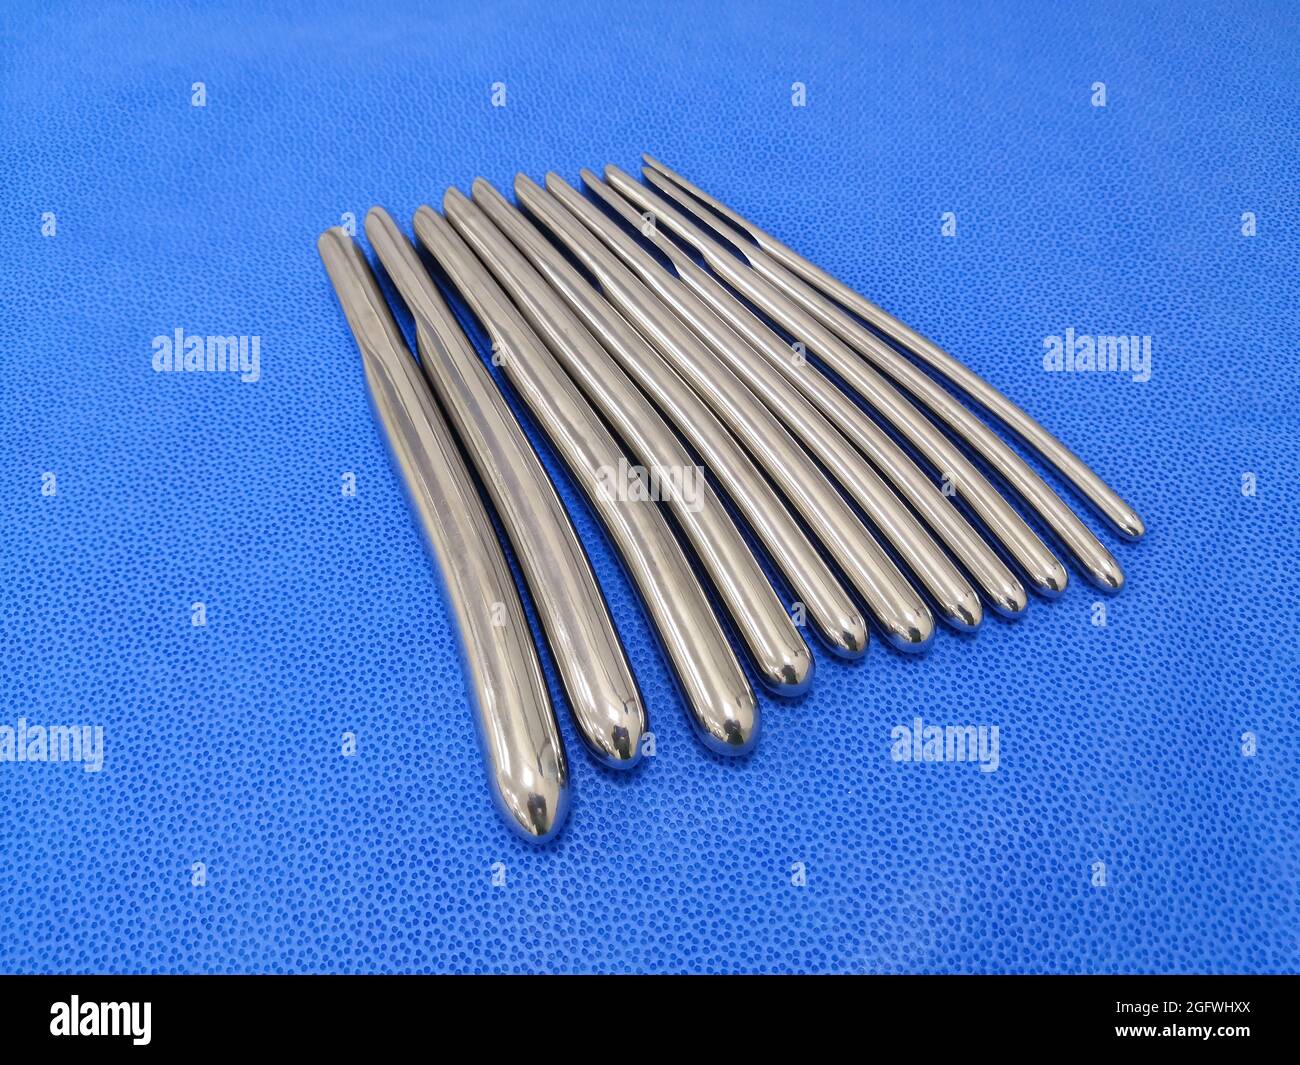 Closeup Image of Medical Surgical Single End Urethral Dilator Set In Different Size Using For Medical Examination & Diagnostic Procedure. Selective Fo Stock Photo